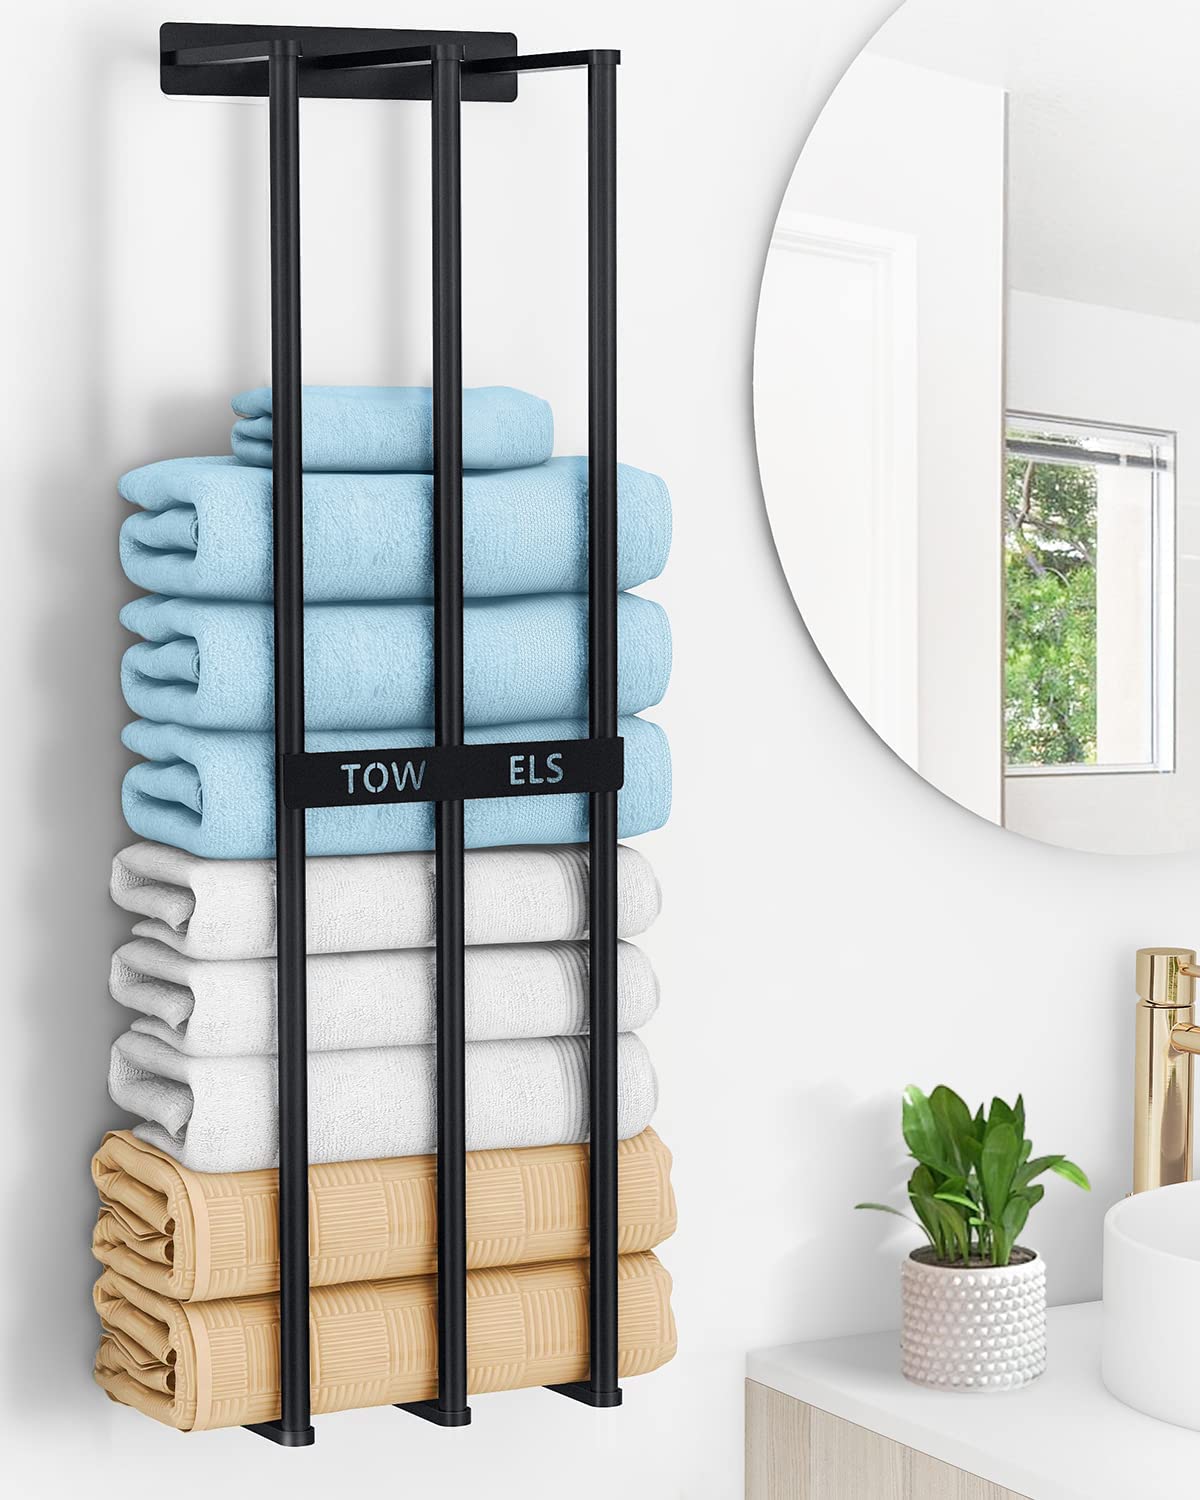 a towel storage that is fixed to the wall and that can store multiple towels is a great addition to a bathroom in need of vertical storage solution while freeing the floor space